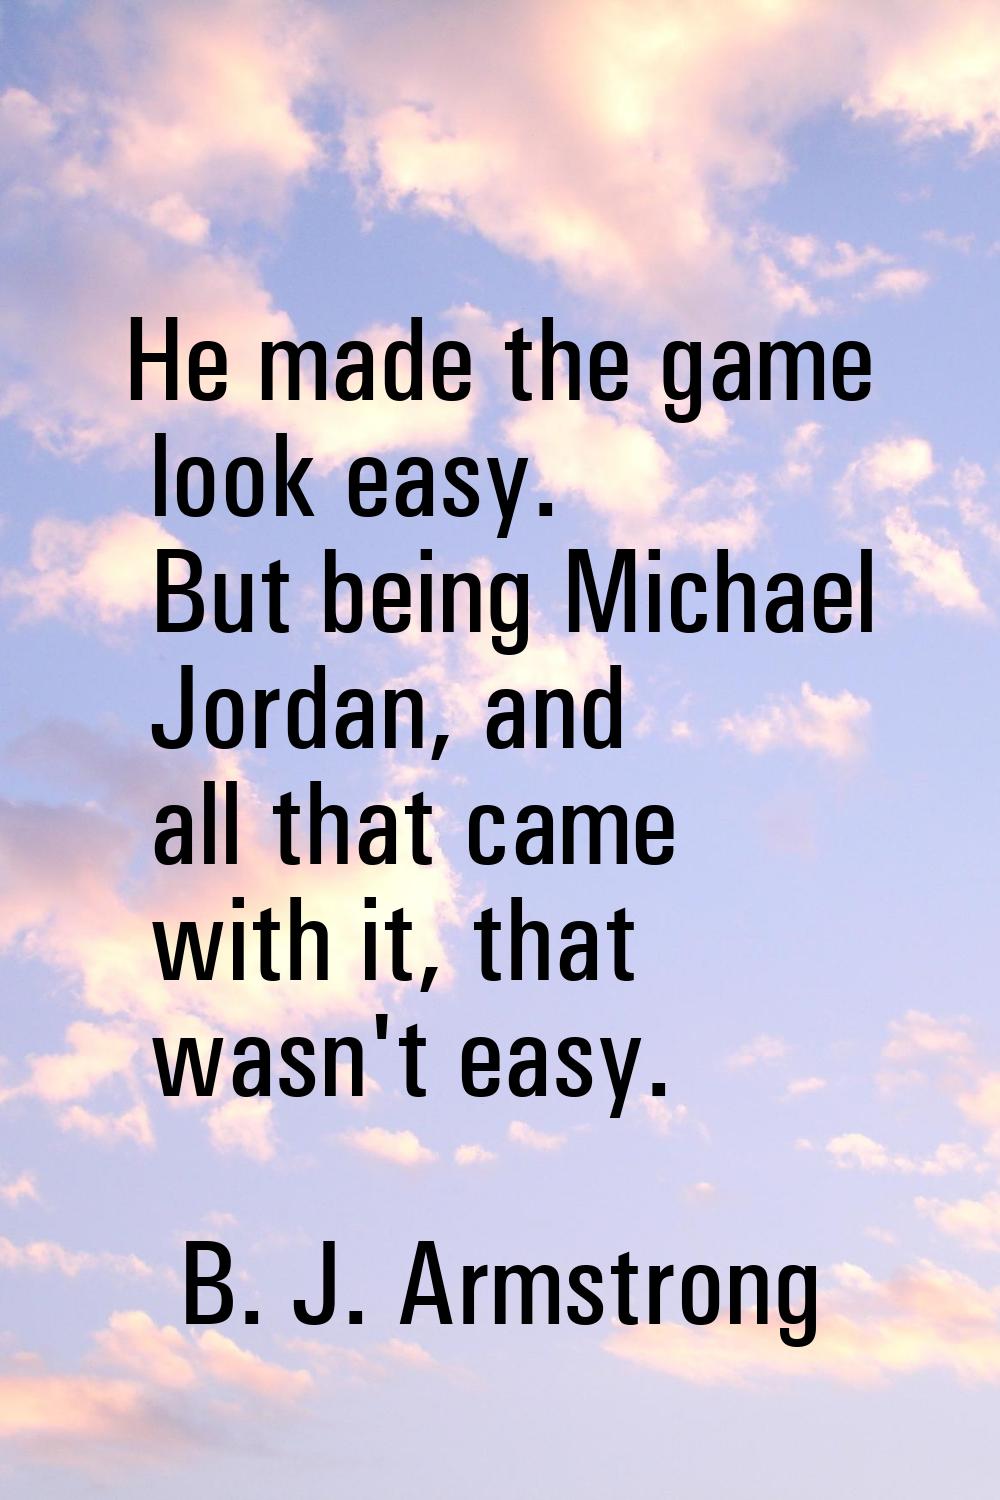 He made the game look easy. But being Michael Jordan, and all that came with it, that wasn't easy.